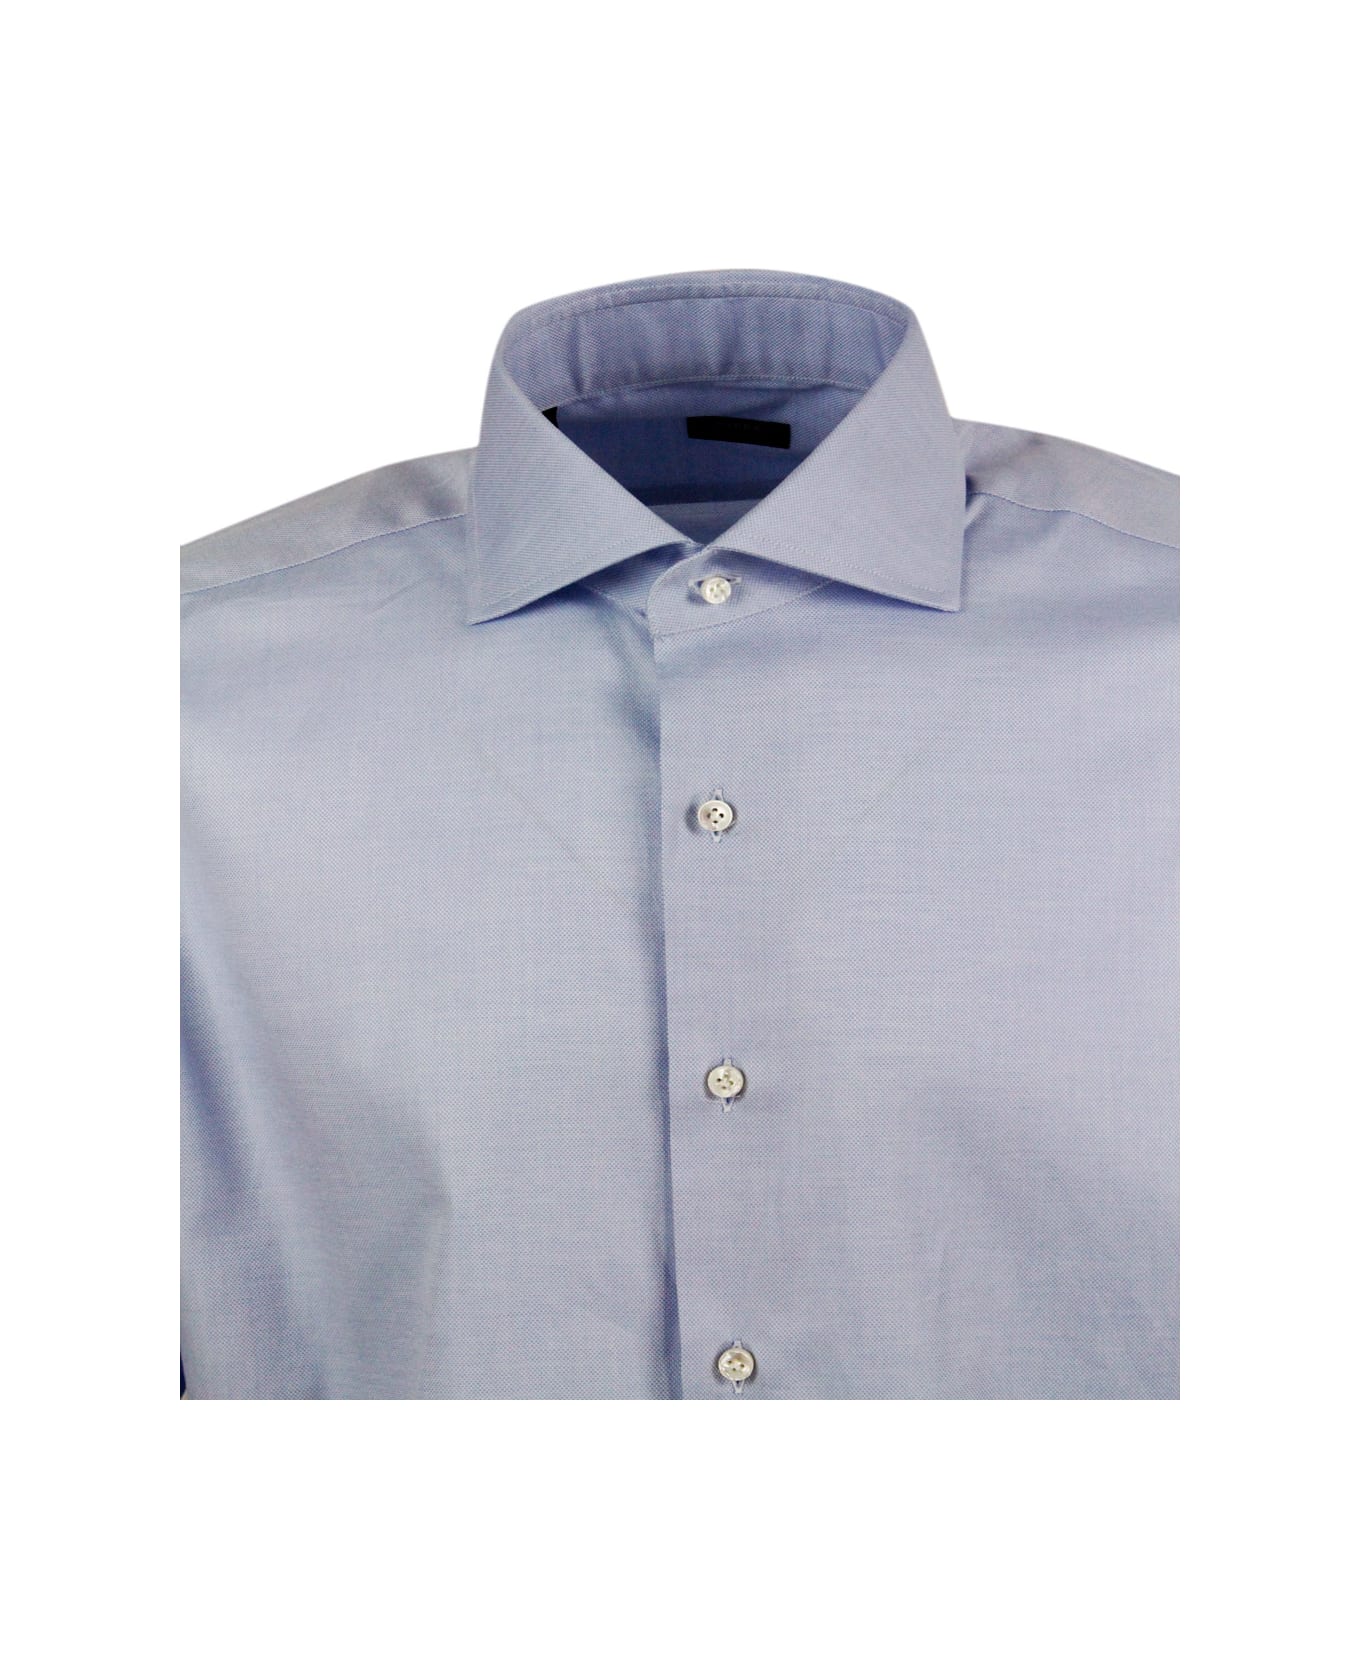 Barba Napoli Slim Fit Shirt In Fine Stretch Honeycomb Cotton, Italian Collar, Hand-sewn Black Label And Mother-of-pearl Buttons - Light Blu